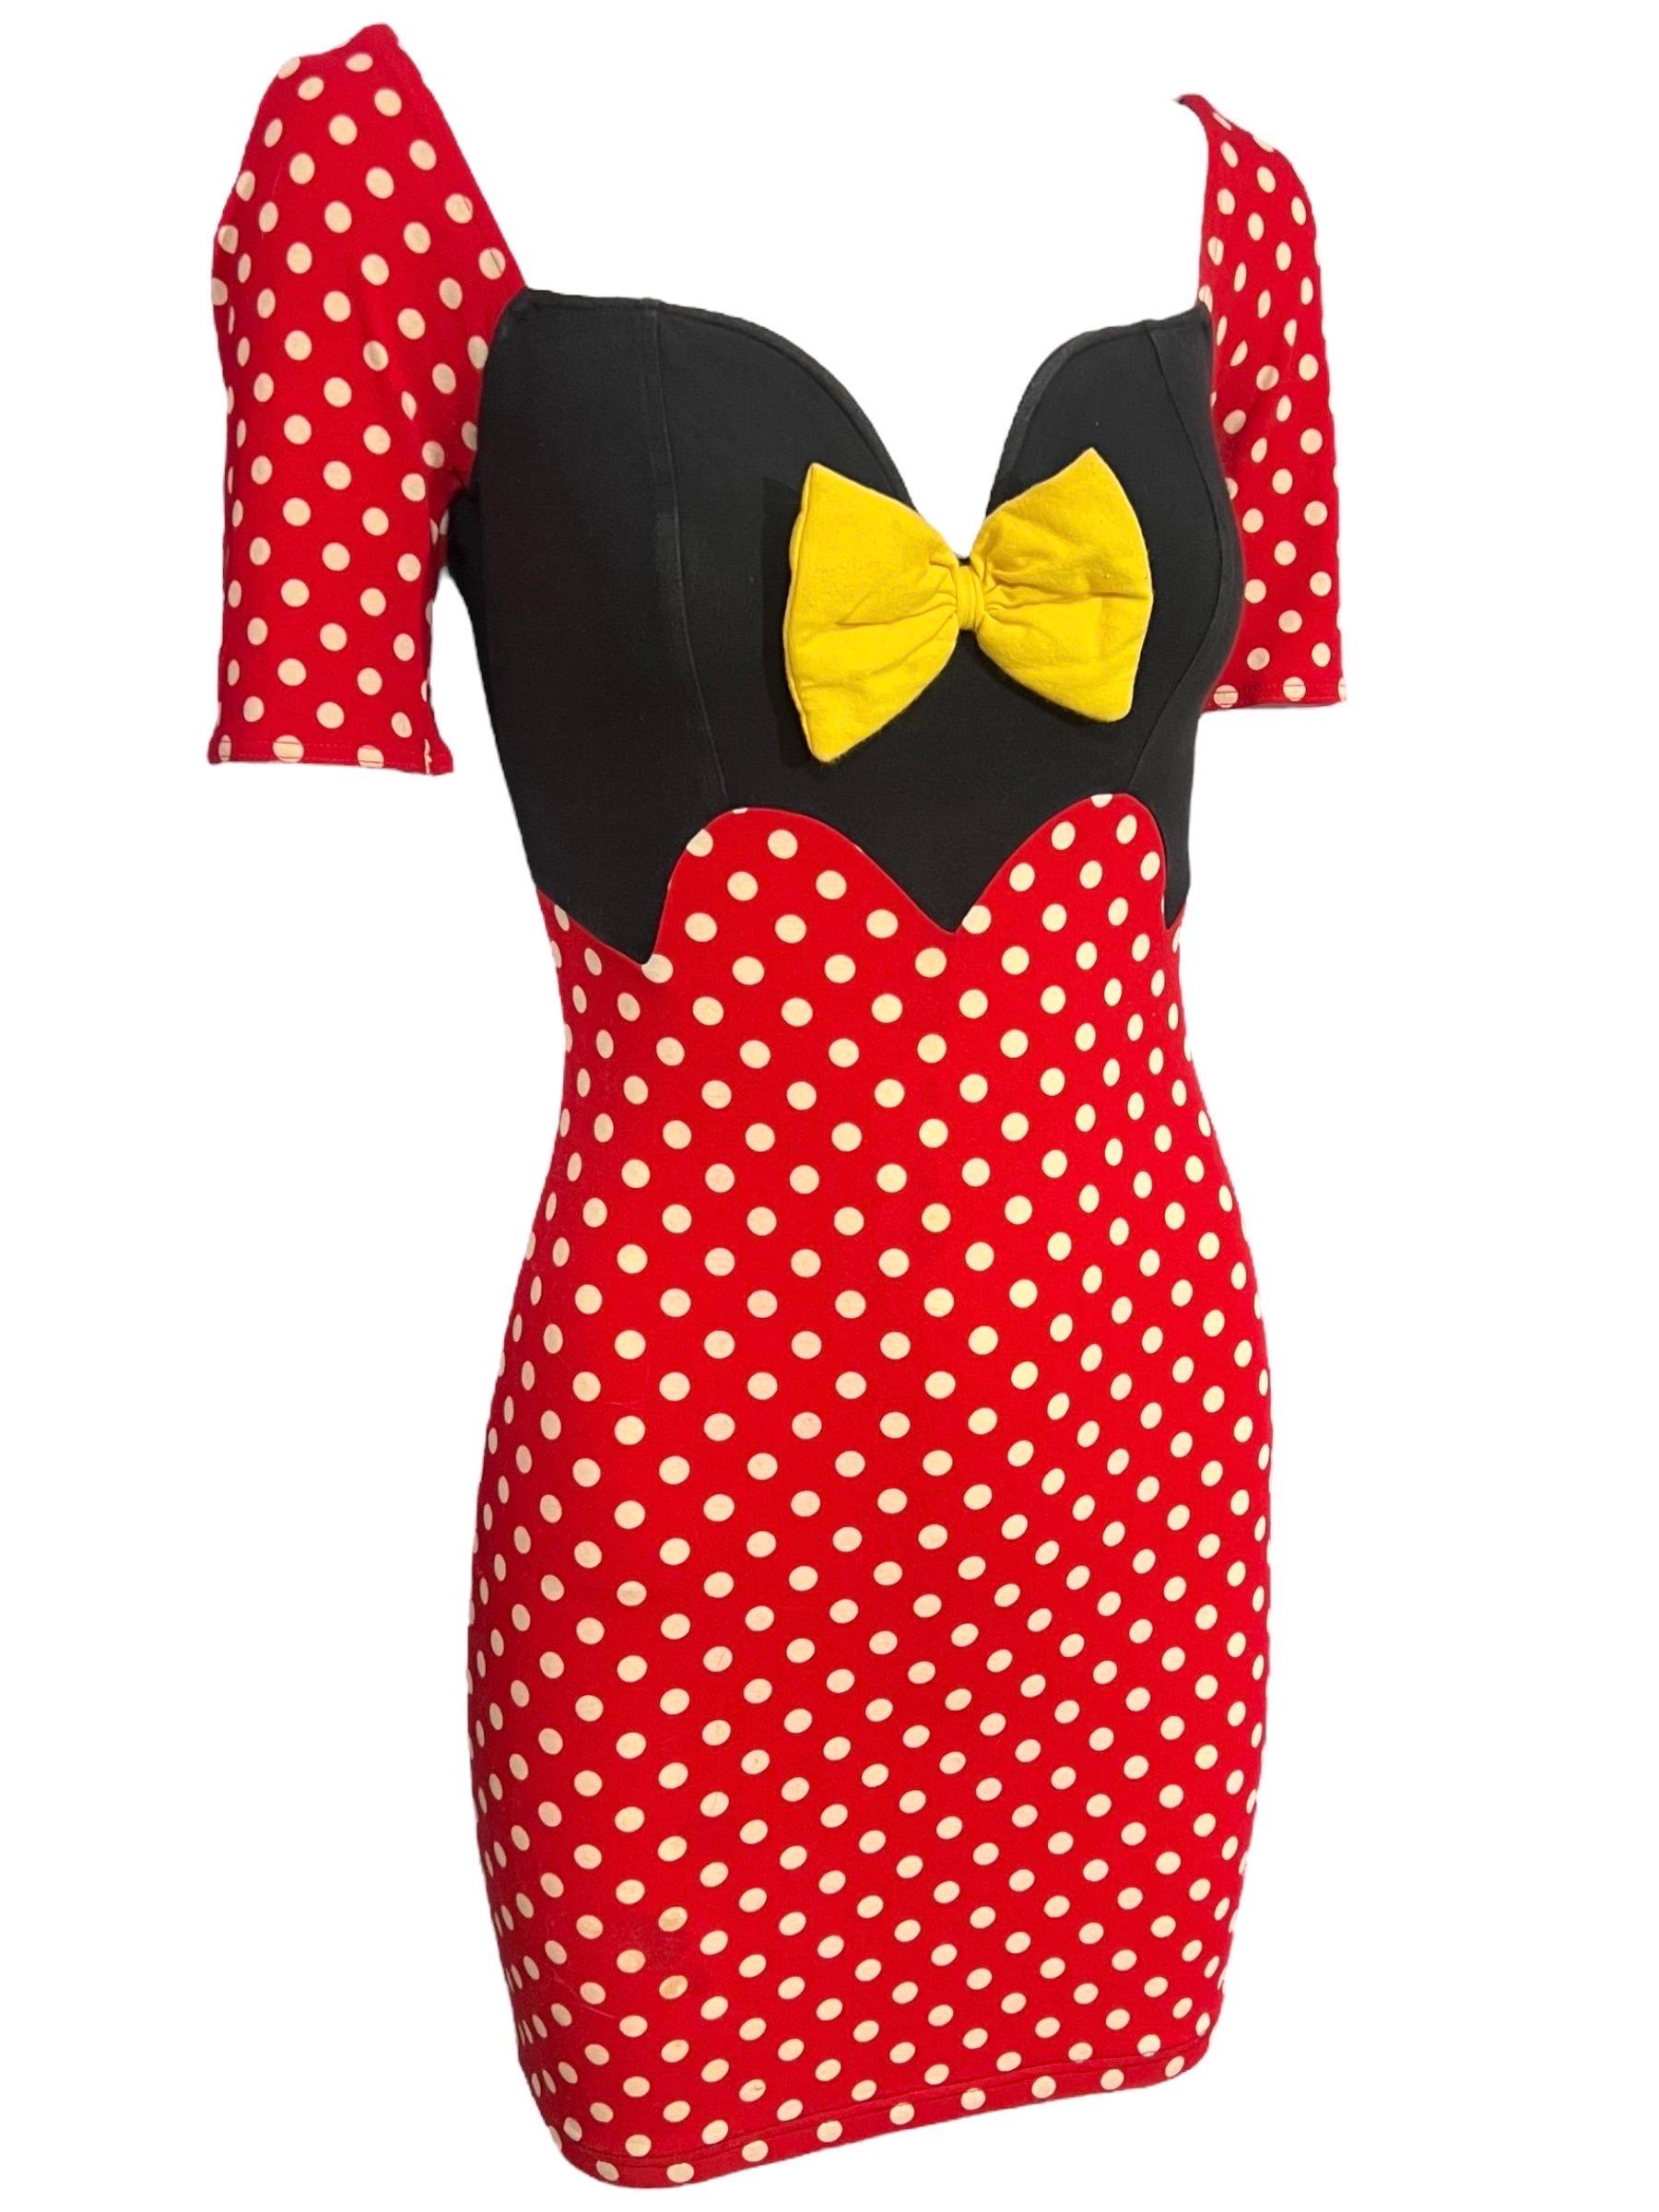 Super fun and whimsical rare Moschino late 80's/early 90's polka dot minnie mouse inspired dress accented with a yellow bow.
Featuring a sweetheart neckline and cap sleeves.
An iconic piece of Franco Moschino history.
Made in Italy

Size: US size